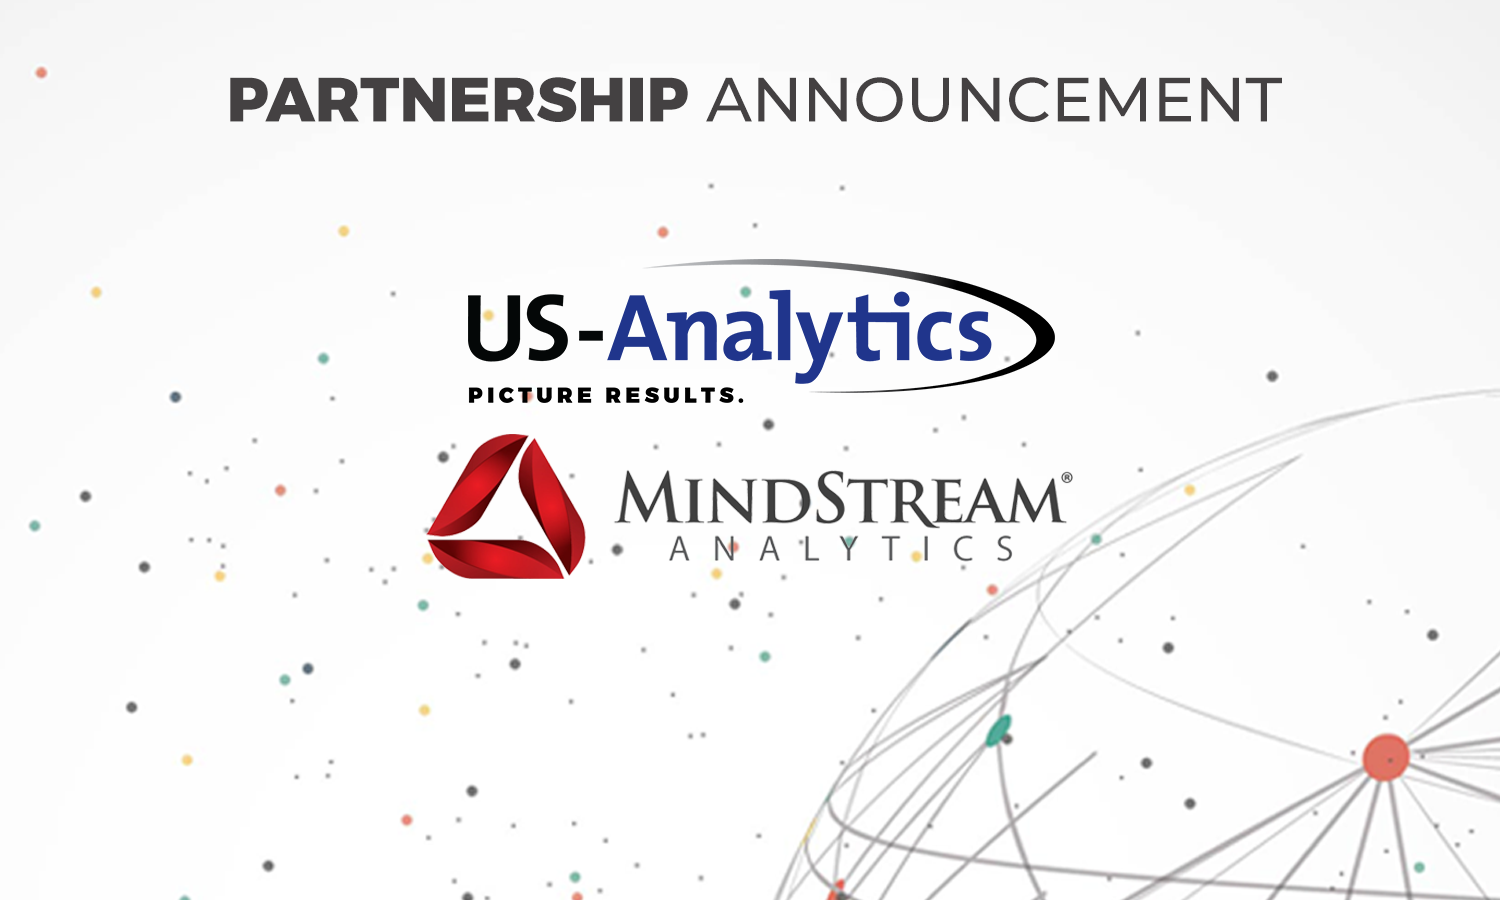 US-Analytics and MindStream Strategically Align to Improve & Expand Solutions to bring Digital Transformation to Finance Teams